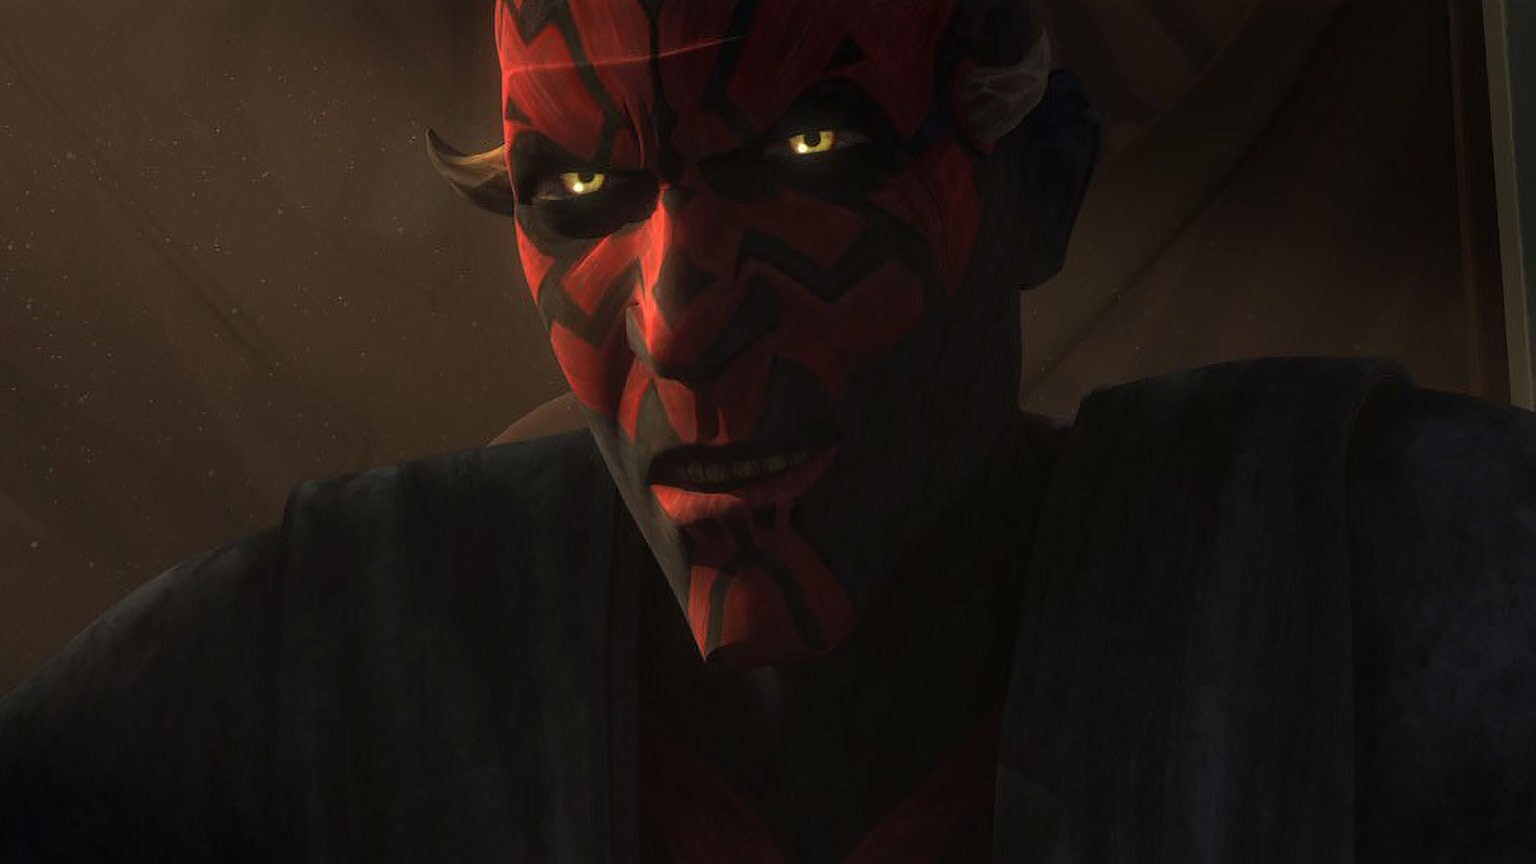 The Clone Wars Rewatch: Corruption and the "Shades of Reason"